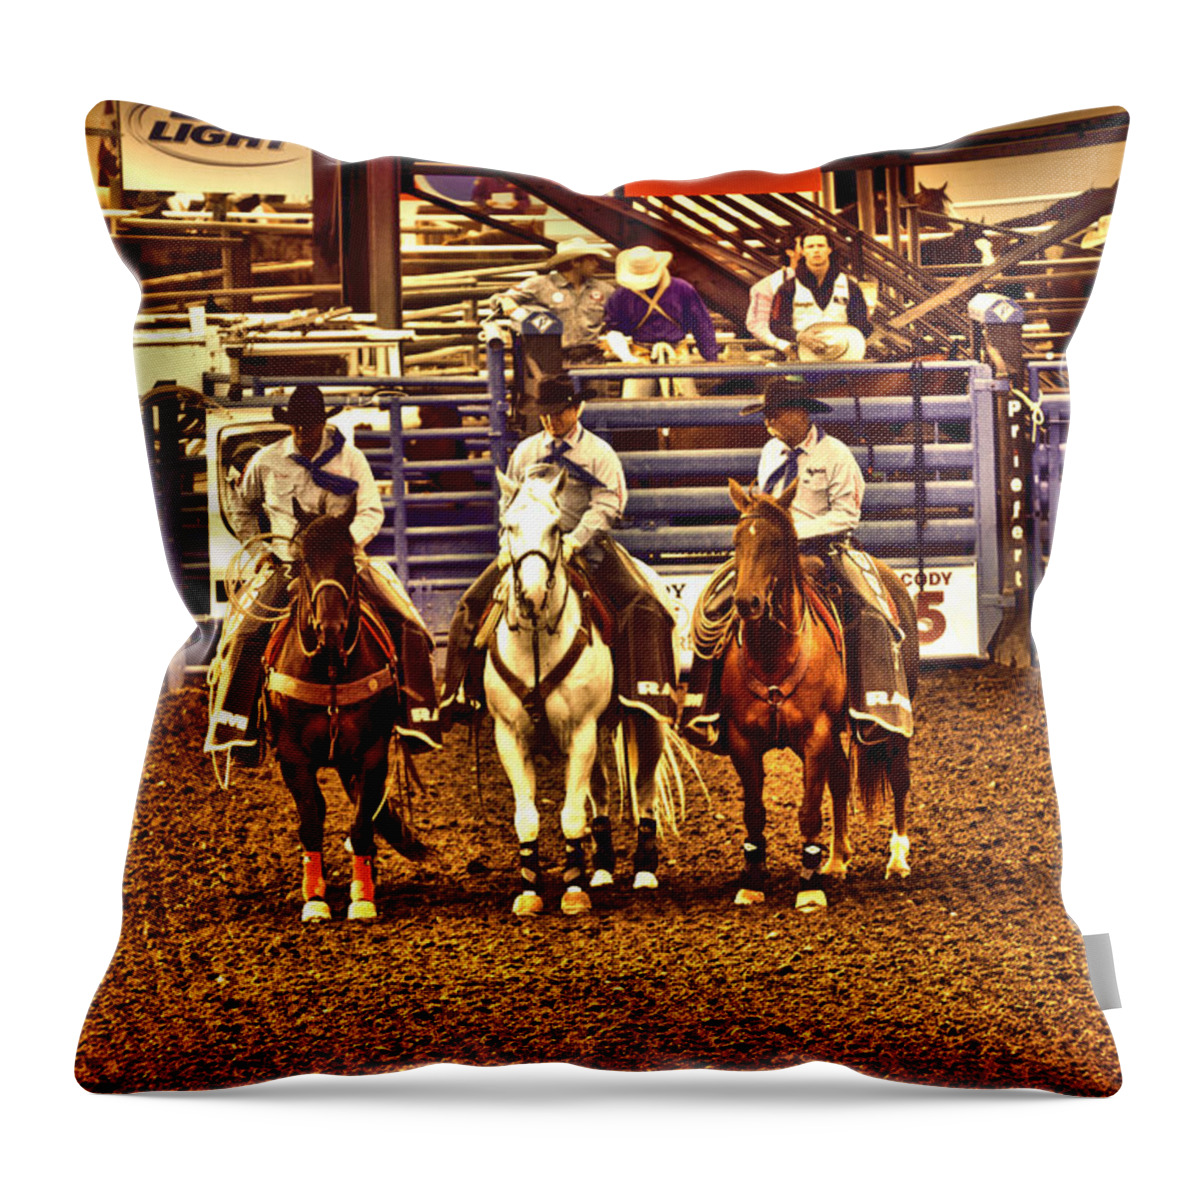 Men Throw Pillow featuring the photograph Men Of The Rodeo by Lisa Holland-Gillem